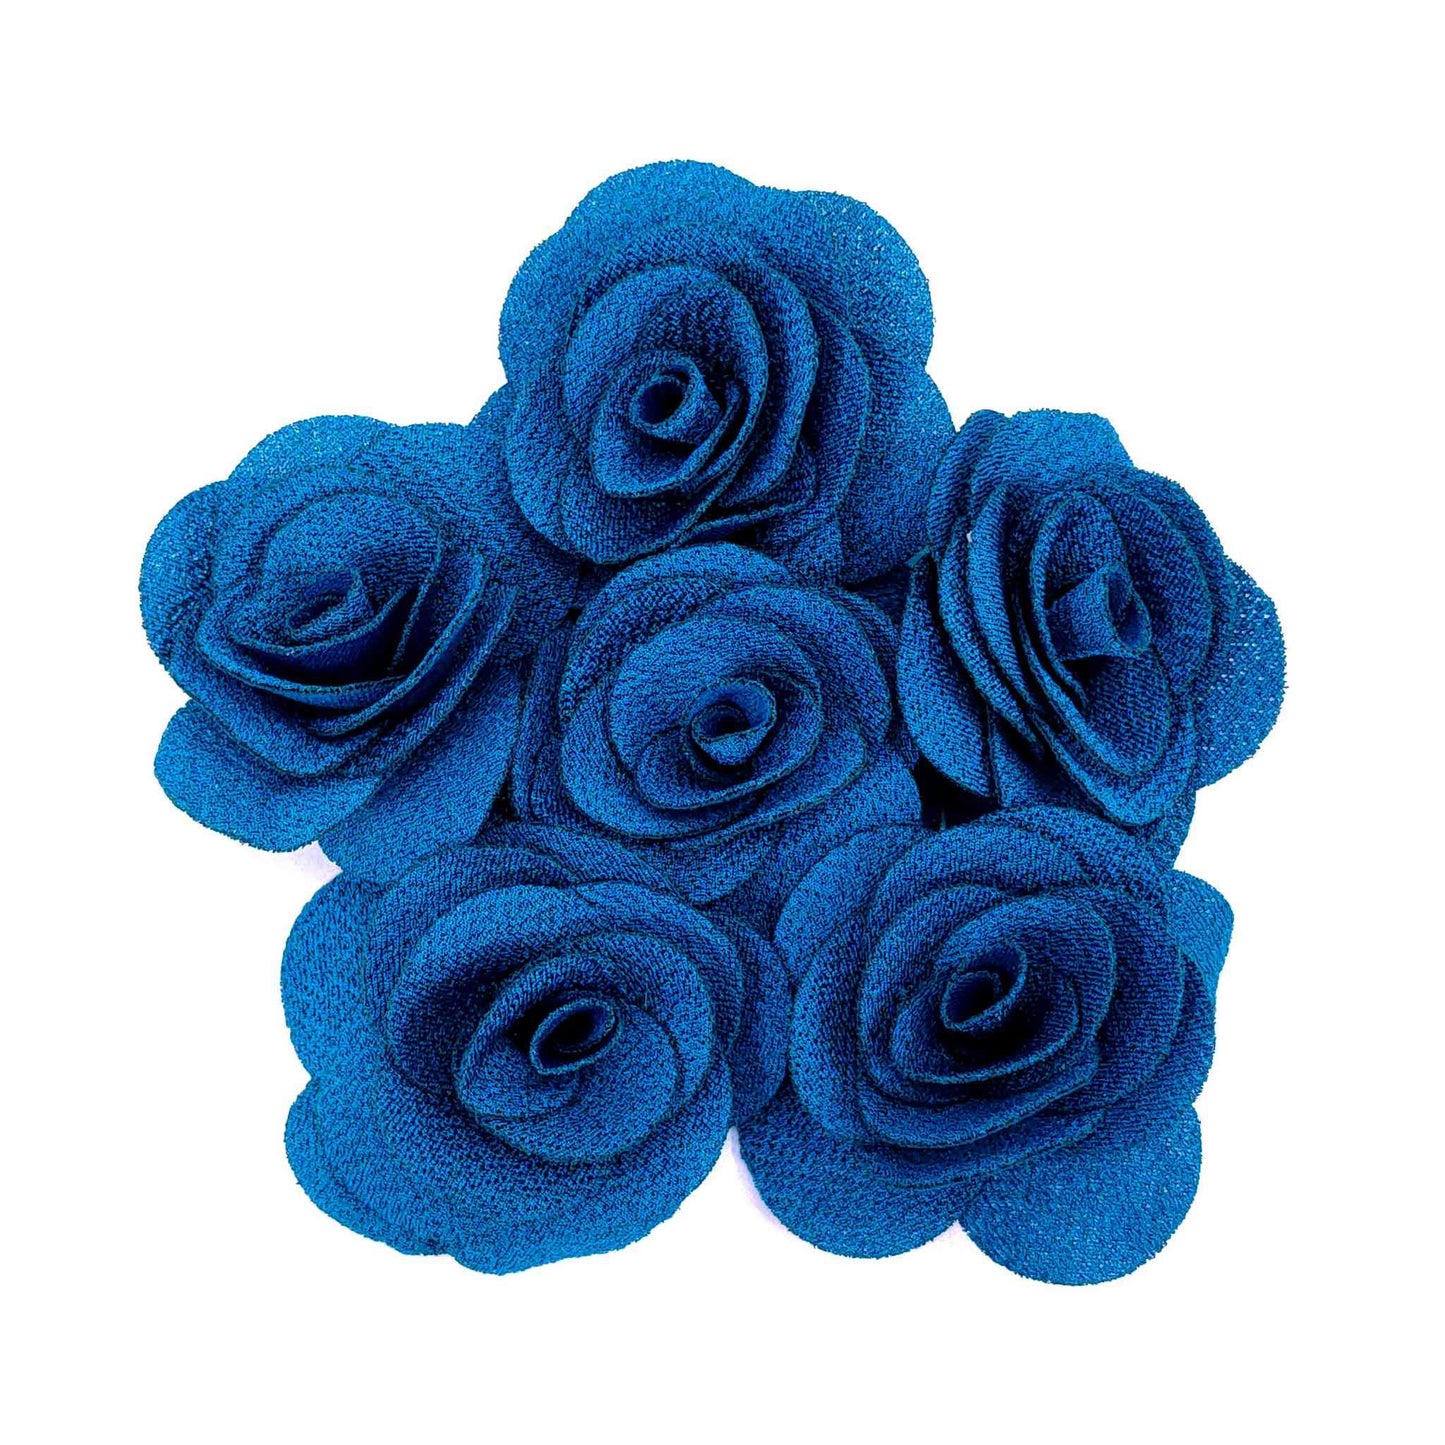 Beautiful Big Fabric Flowers for DIY Craft, Trouseau Packing or Decoration (Bunch of 12) - Design 39, Royal Blue - Indian Petals